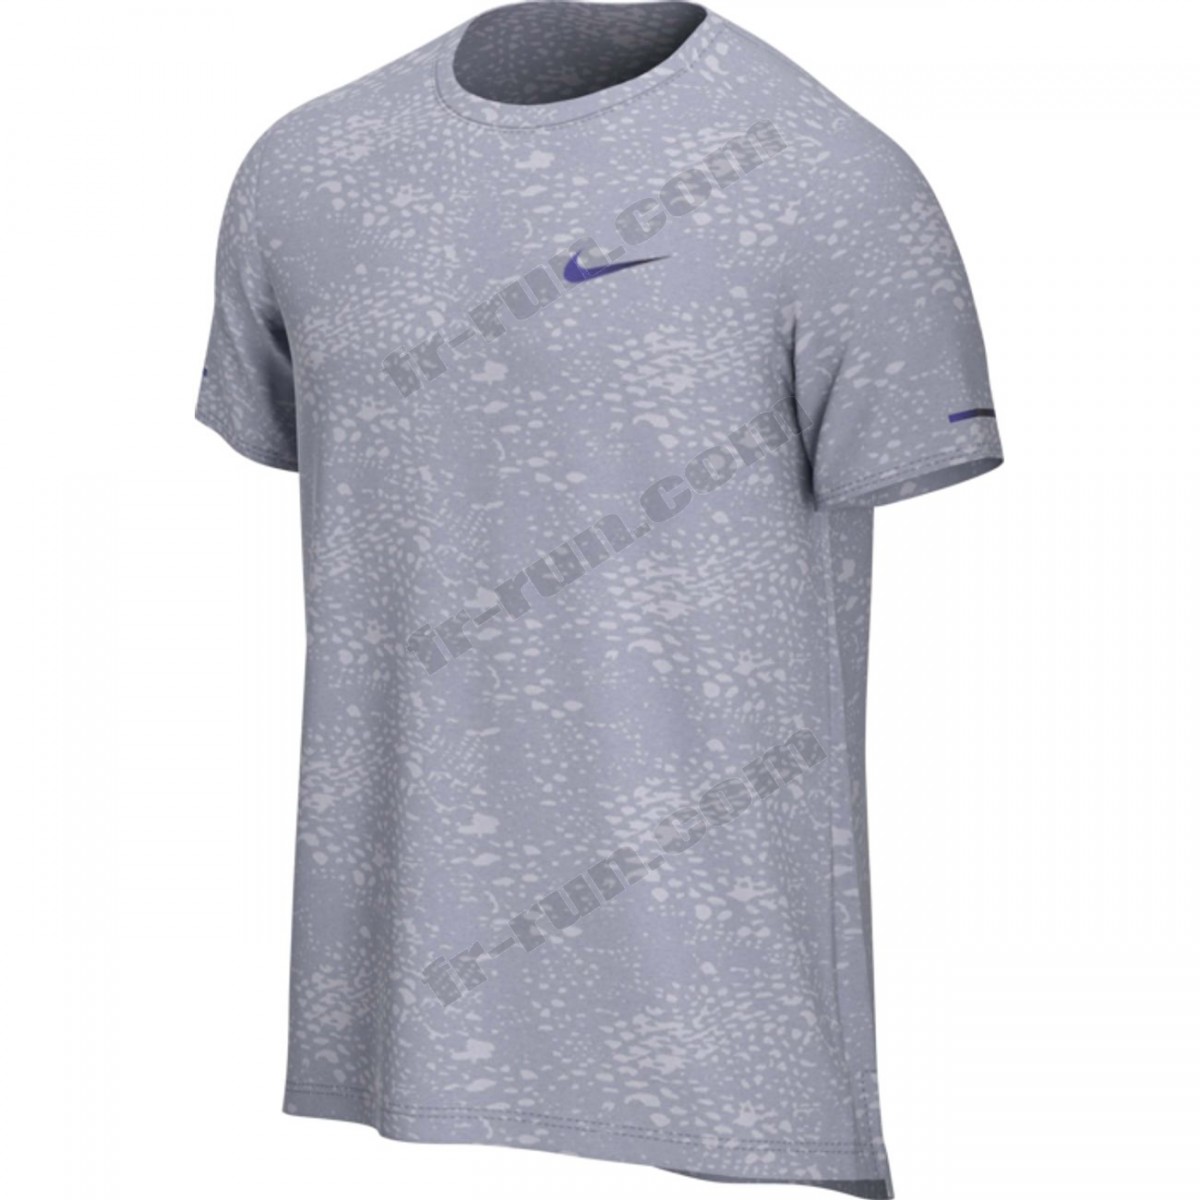 Nike/TOP running homme NIKE RN DVN DF MILER SS EMBSS √ Nouveau style √ Soldes - -0